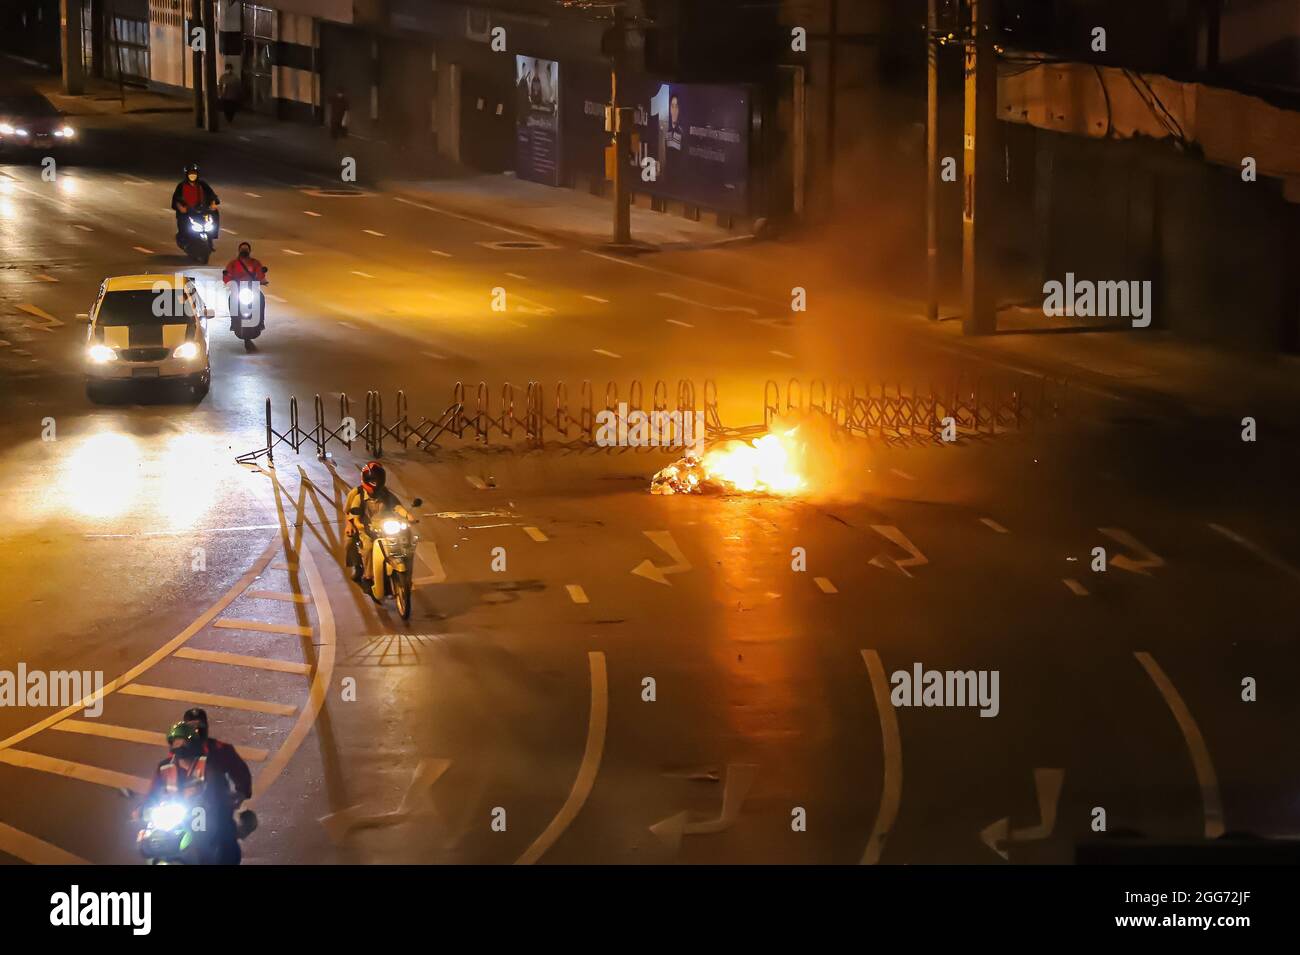 Bangkok, THAILAND - August 22, 2021: Anti-government protesters burn things to block the road for prevent Riot police come crack down. Stock Photo